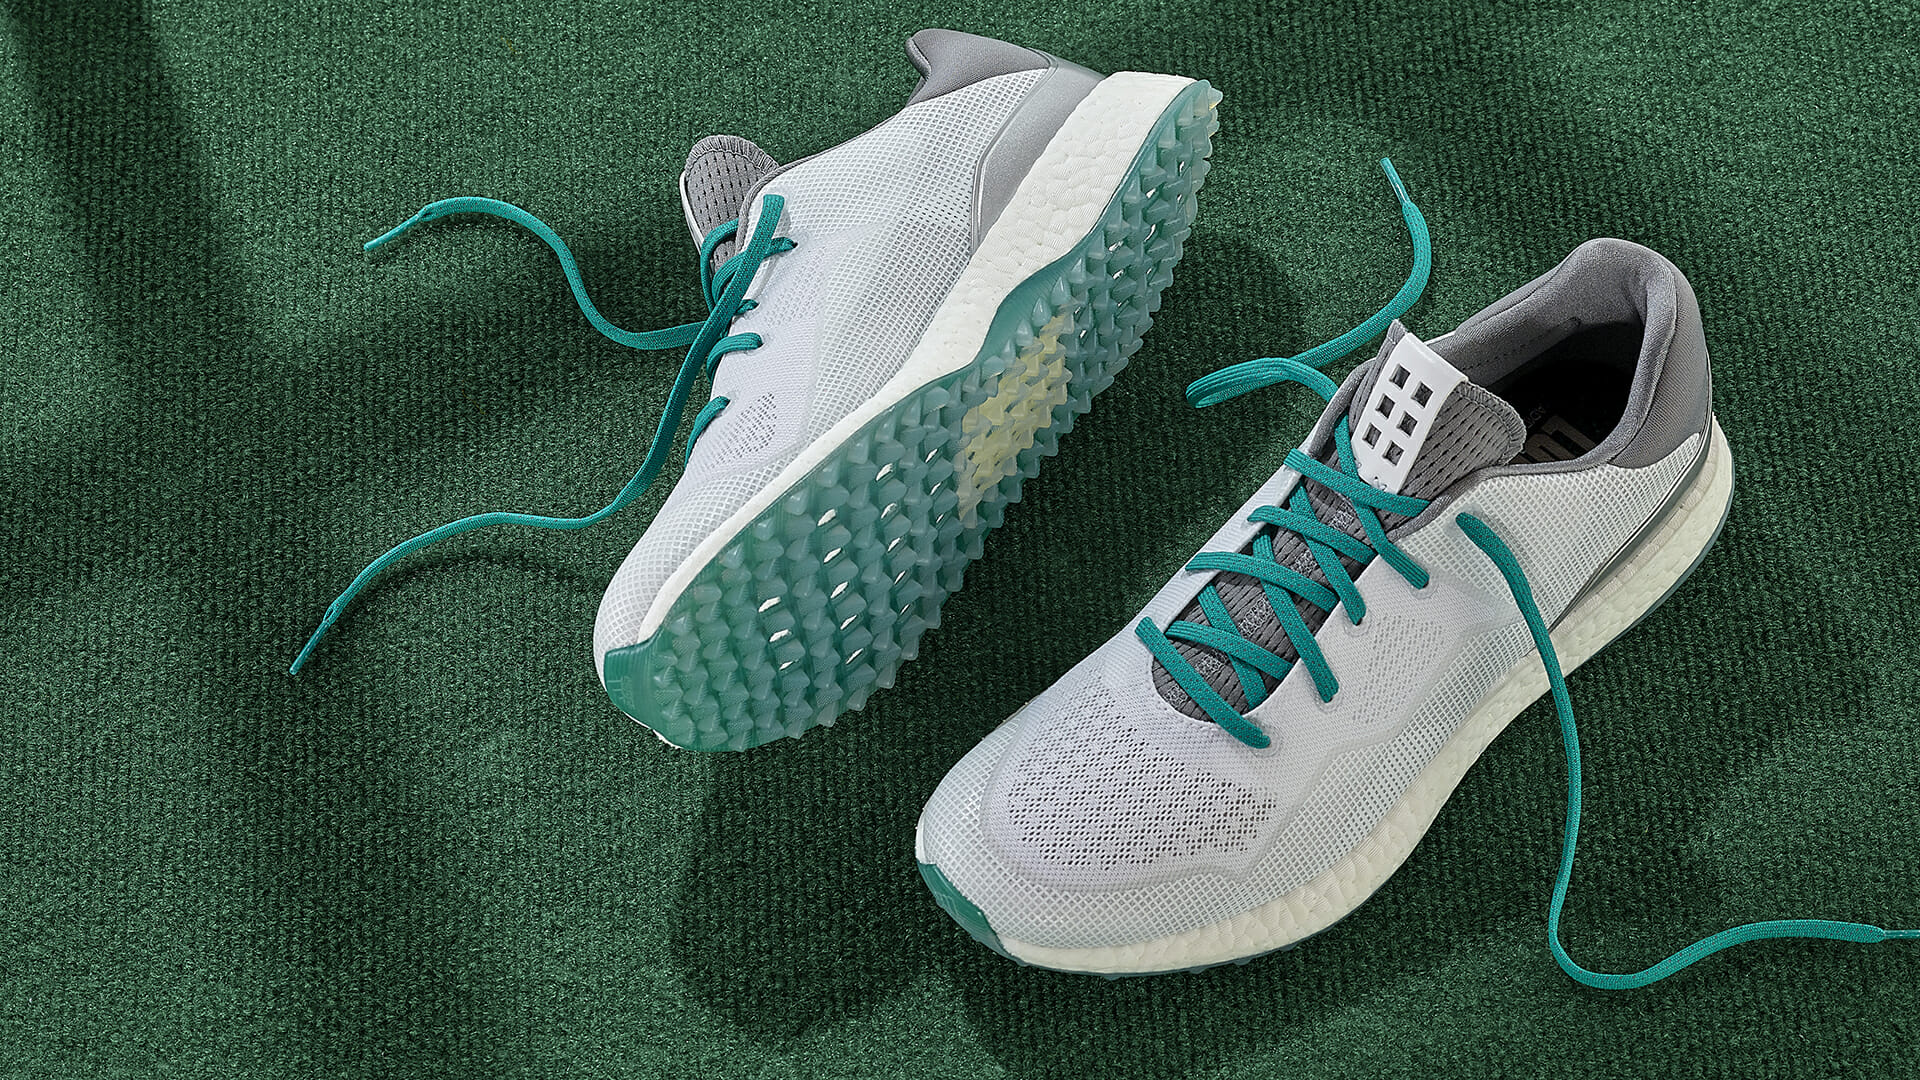 Adidas Golf – Paying Homage to the Low Amateur with Limited Edition Footwear